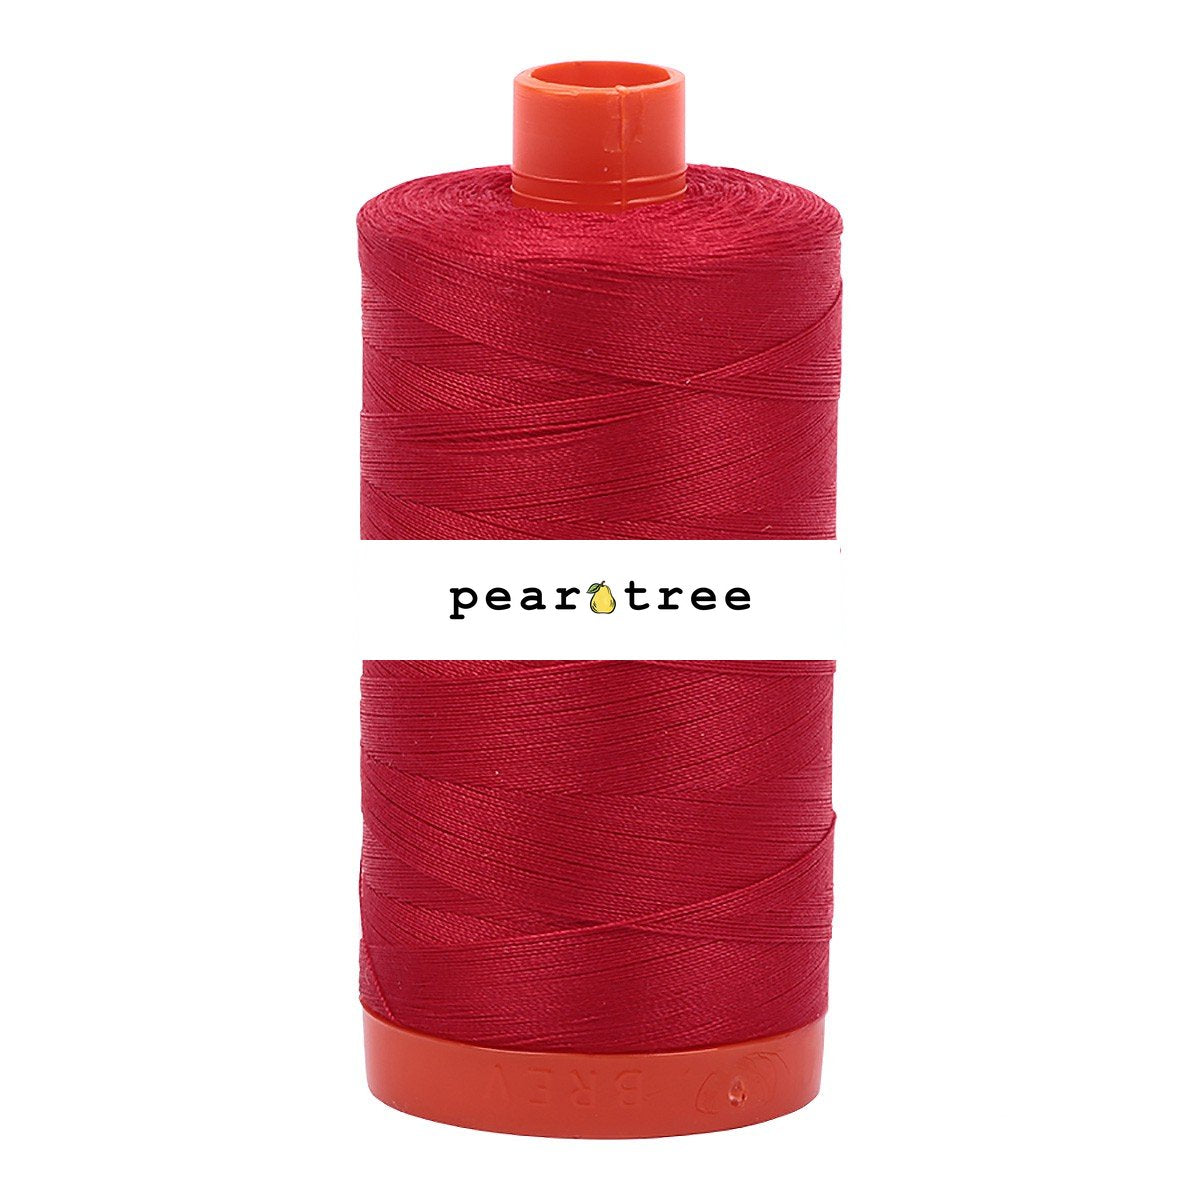 Aurifil Mako Cotton Thread Solid - Red - 50wt 1422yds | Notions | A1050-2250